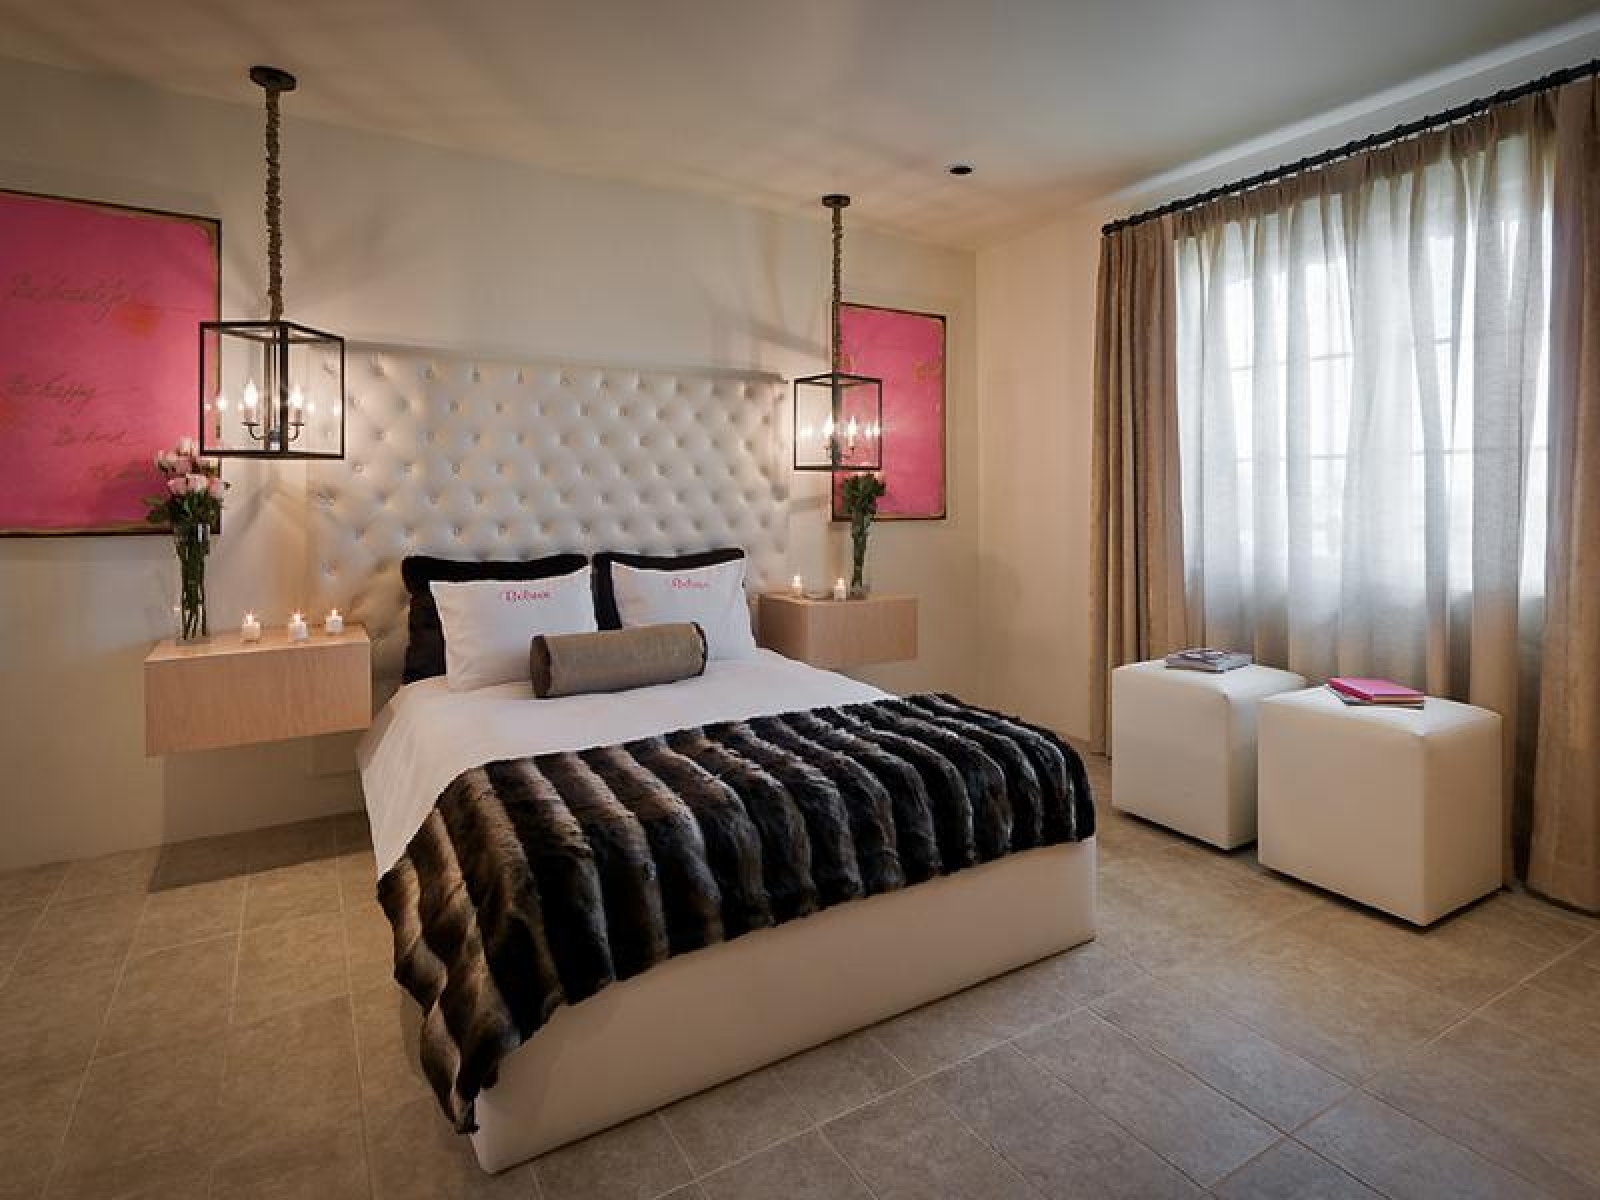 bedroom young adults themes extraordinary jazzy interior decorating